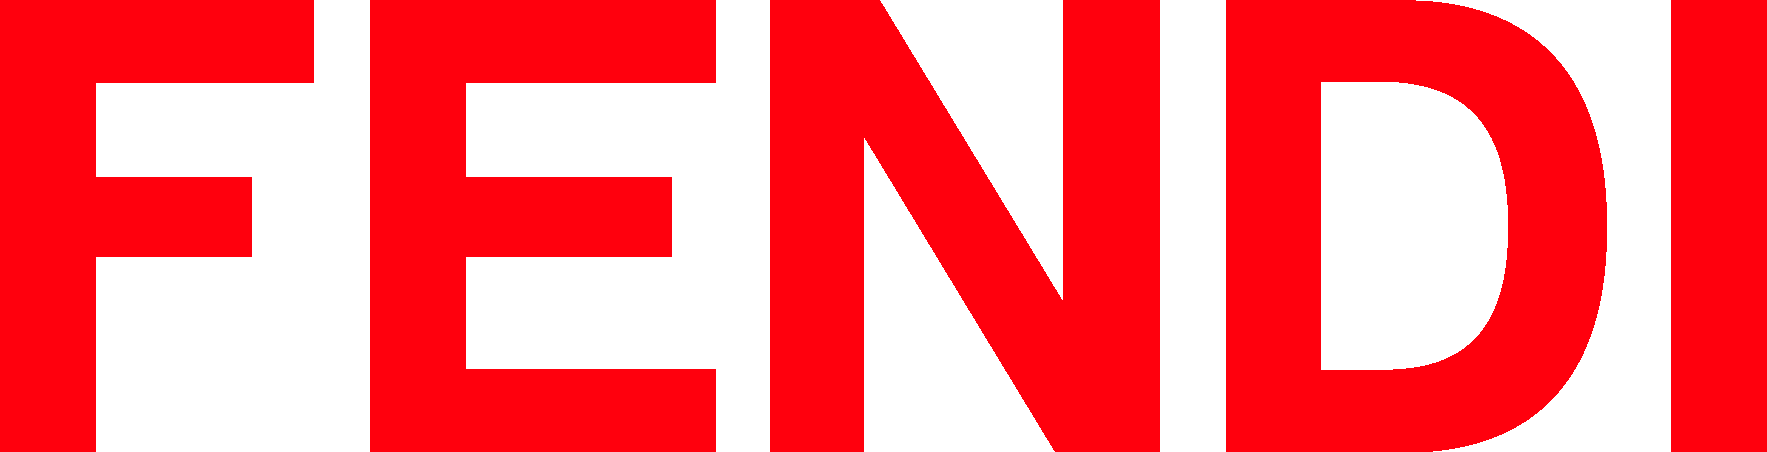 Fendi Red Logo Vector - (.Ai .PNG .SVG .EPS Free Download)